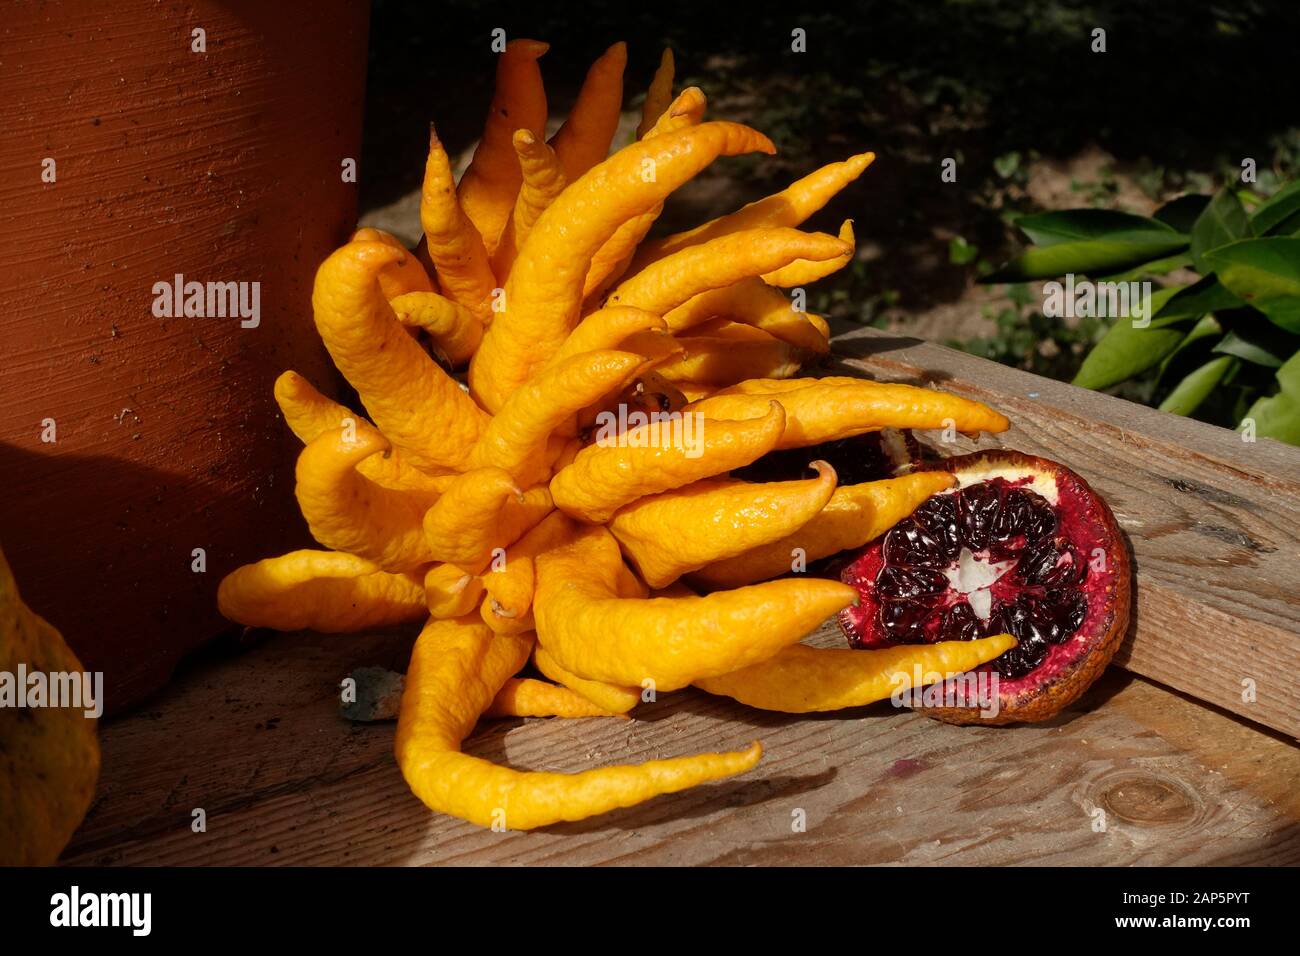 Buddha's hand, Citrus medica var. sarcodactylis, or the fingered citronThe green fair, Milan, Lombardy, Italy, Europe Stock Photo